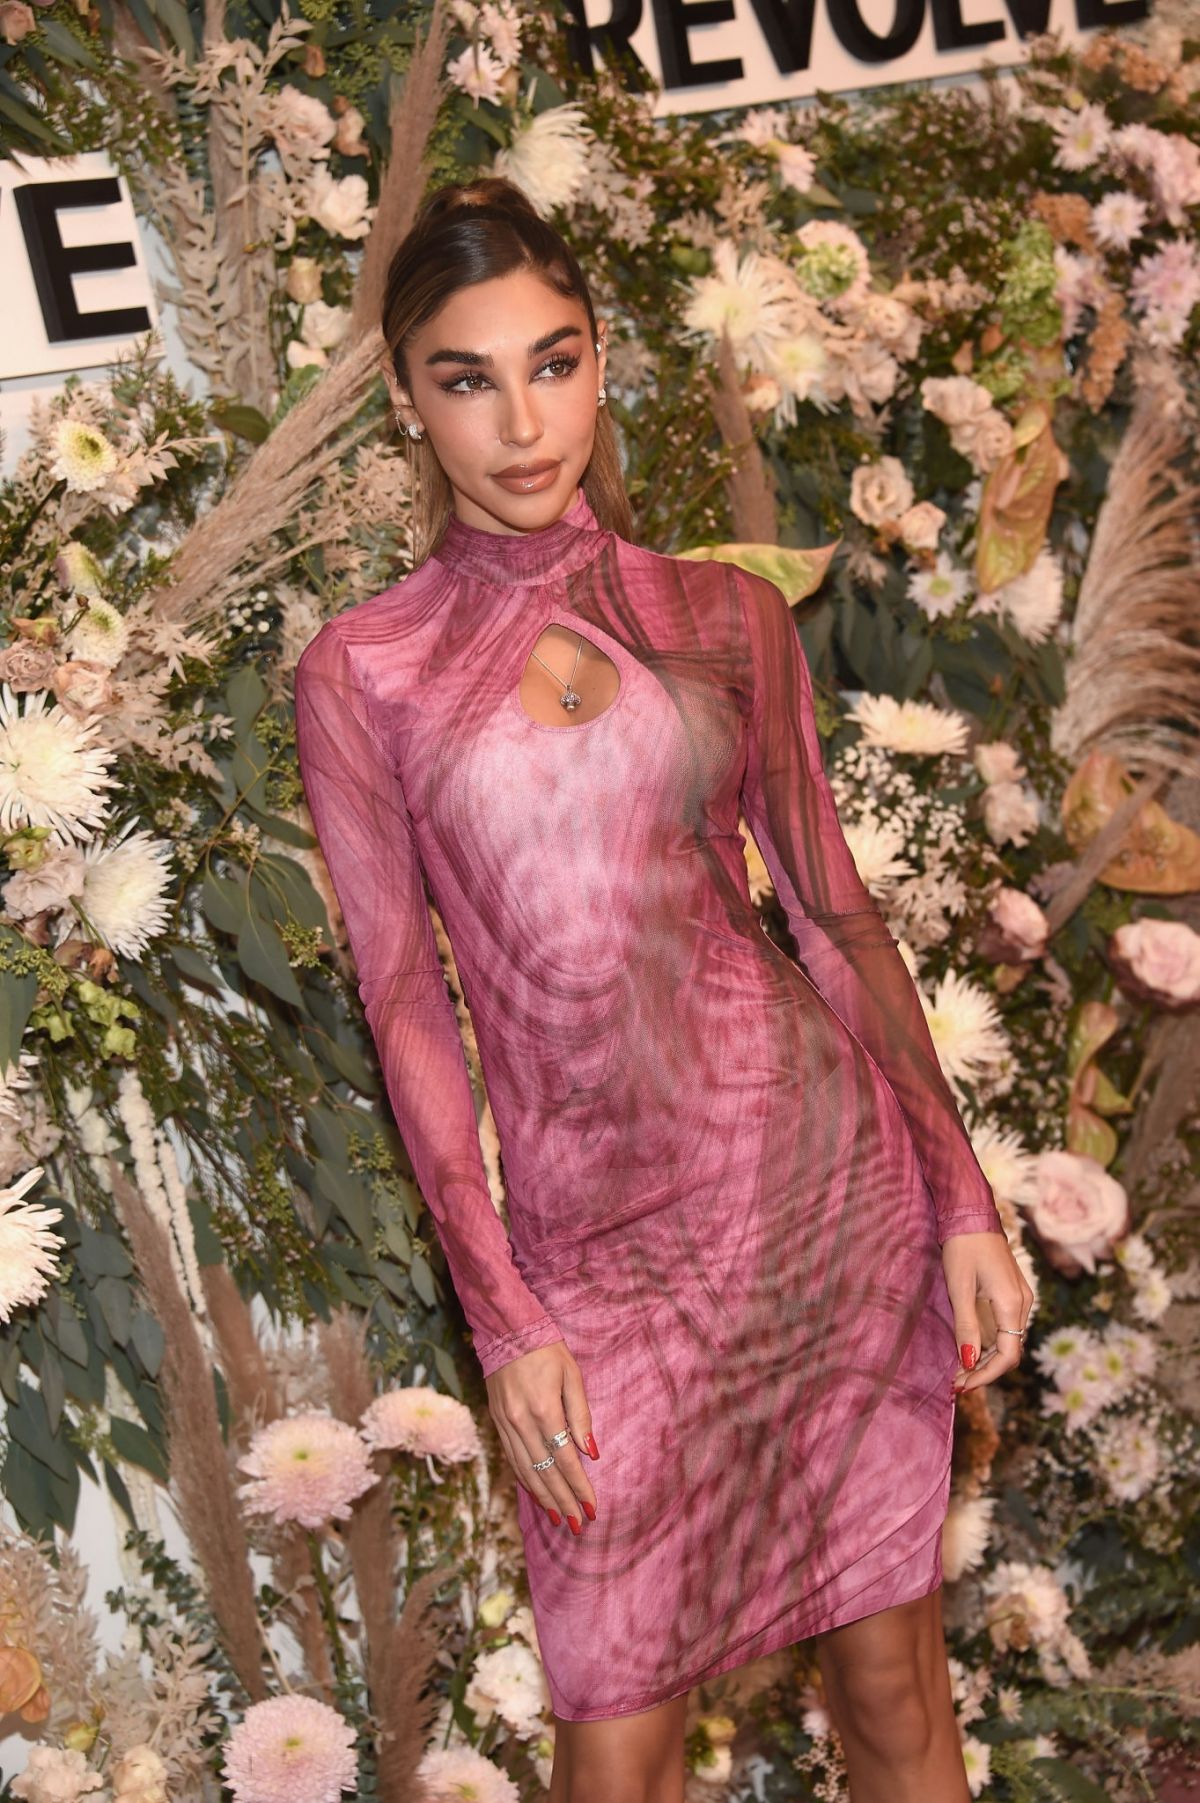 CHANTEL JEFFRIES at Revolve Gallery NYFW Presentation and Pop-up 09/09 ...